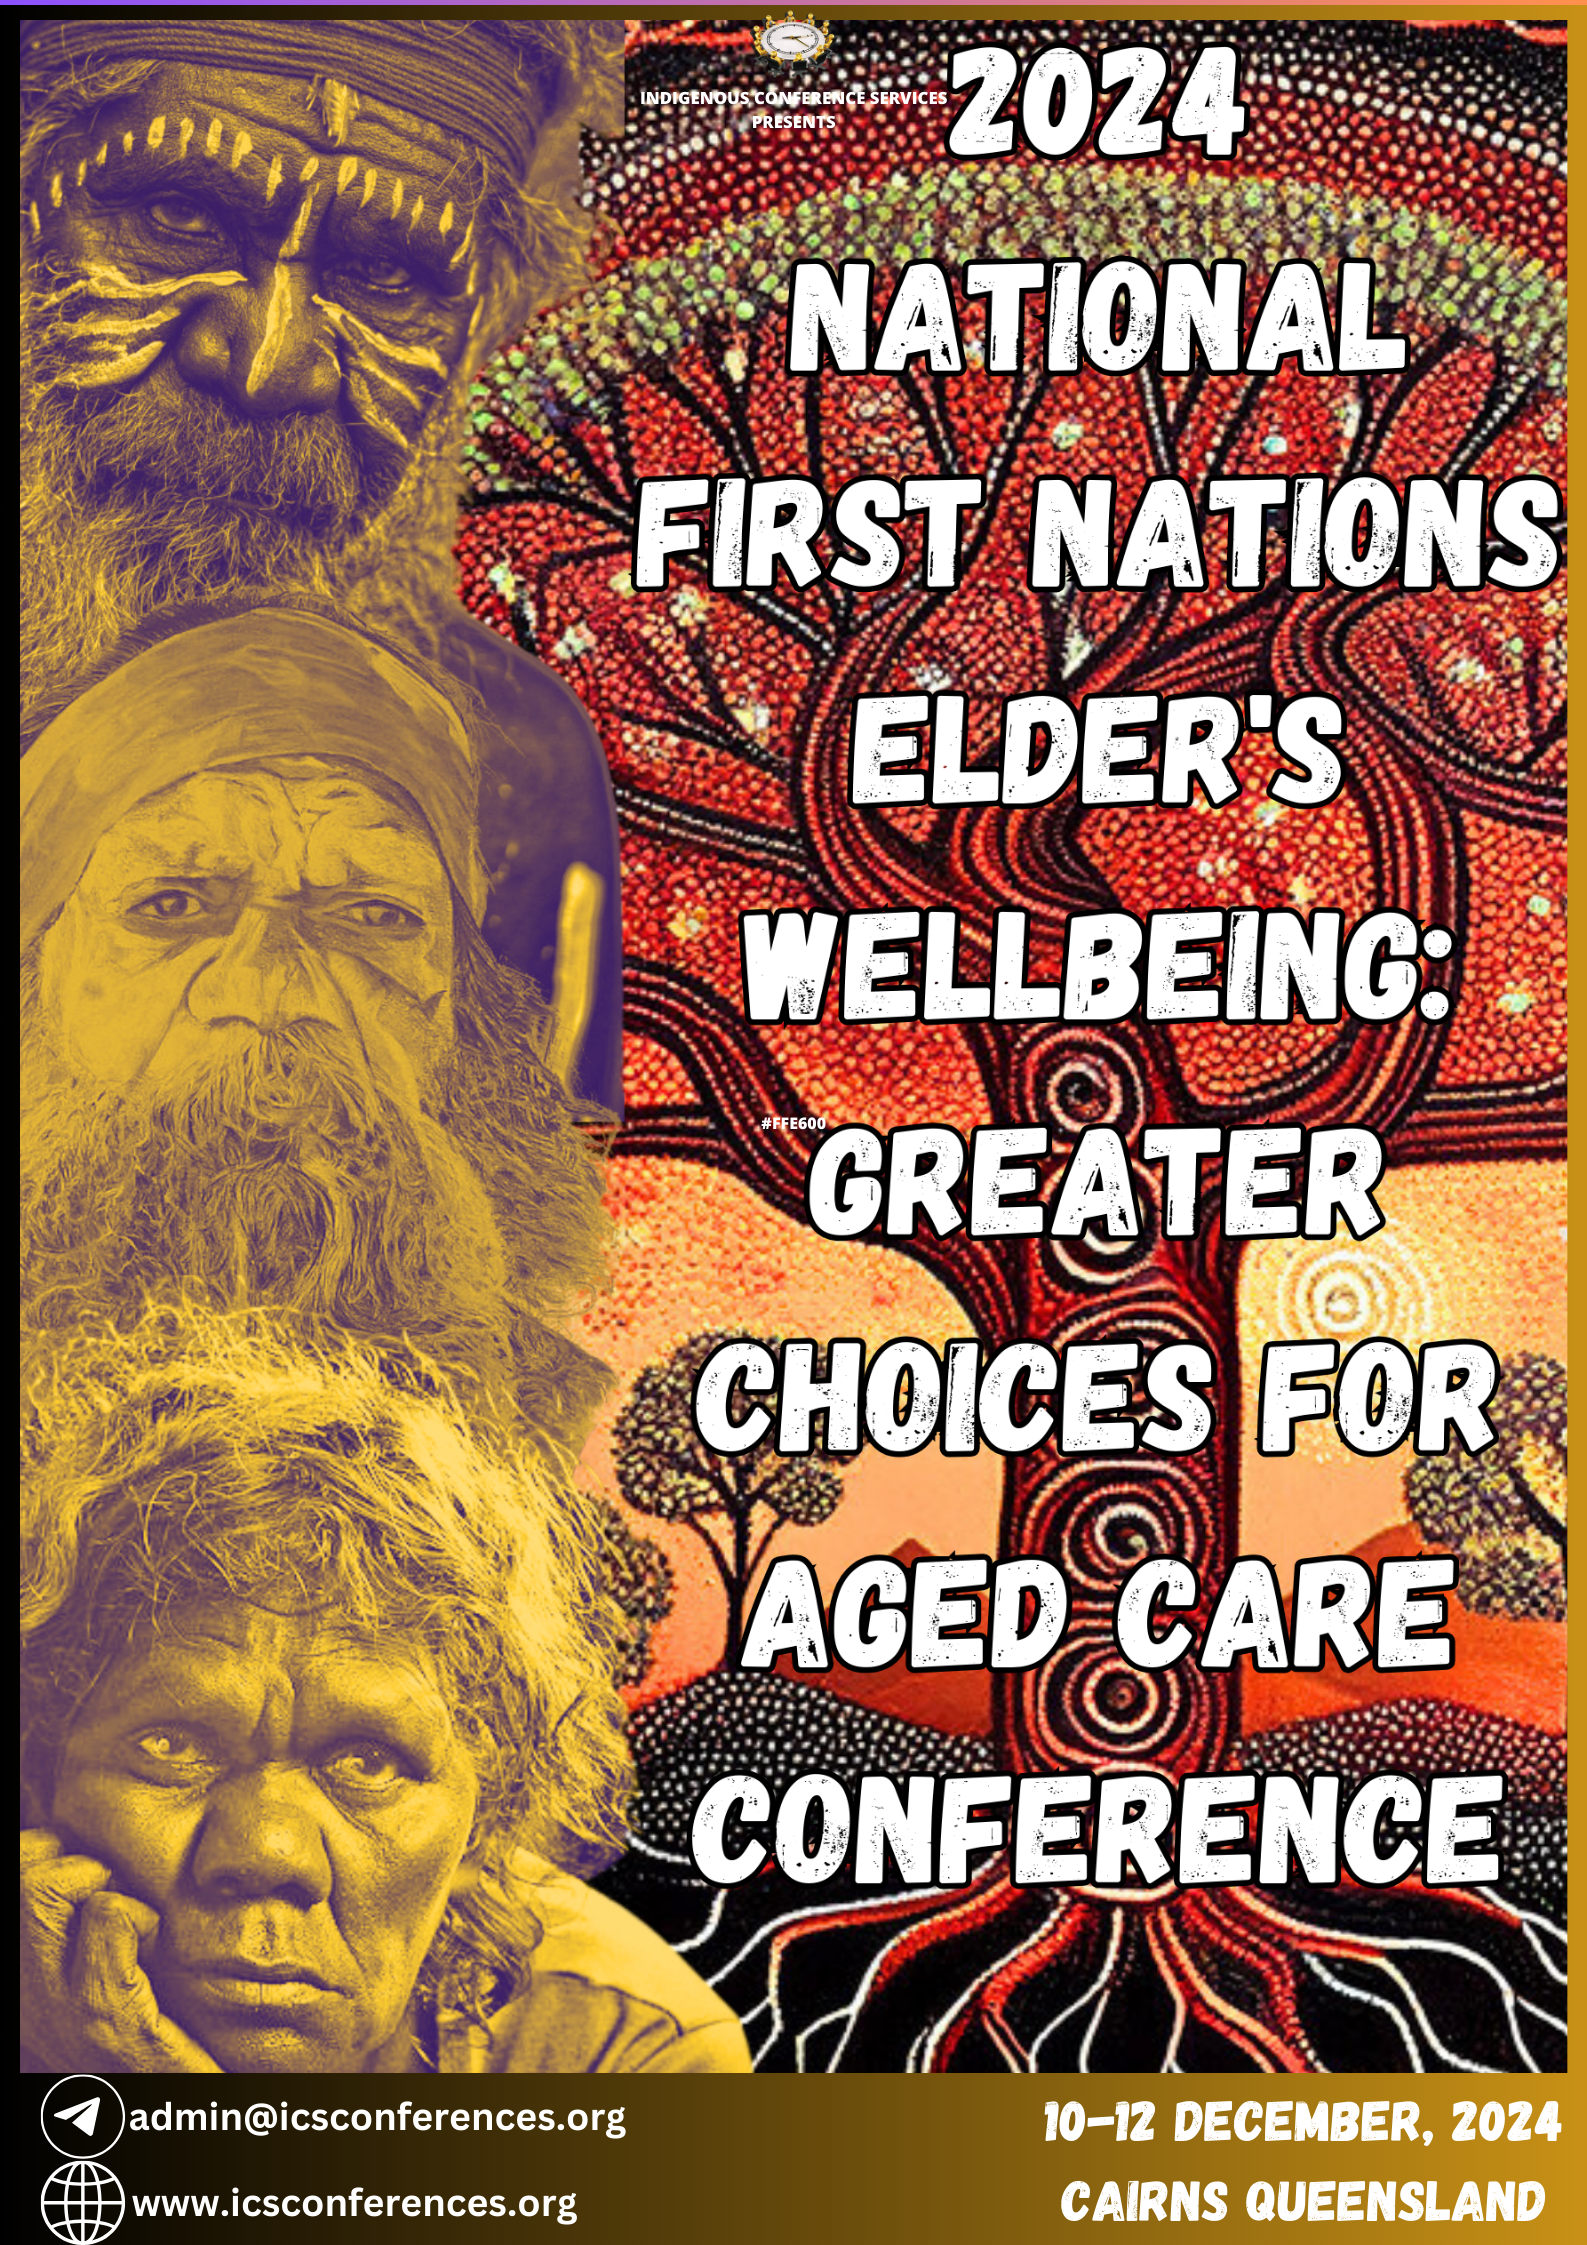 National First Nations Elder's Wellbeing: Greater Choices For Aged Care Conference